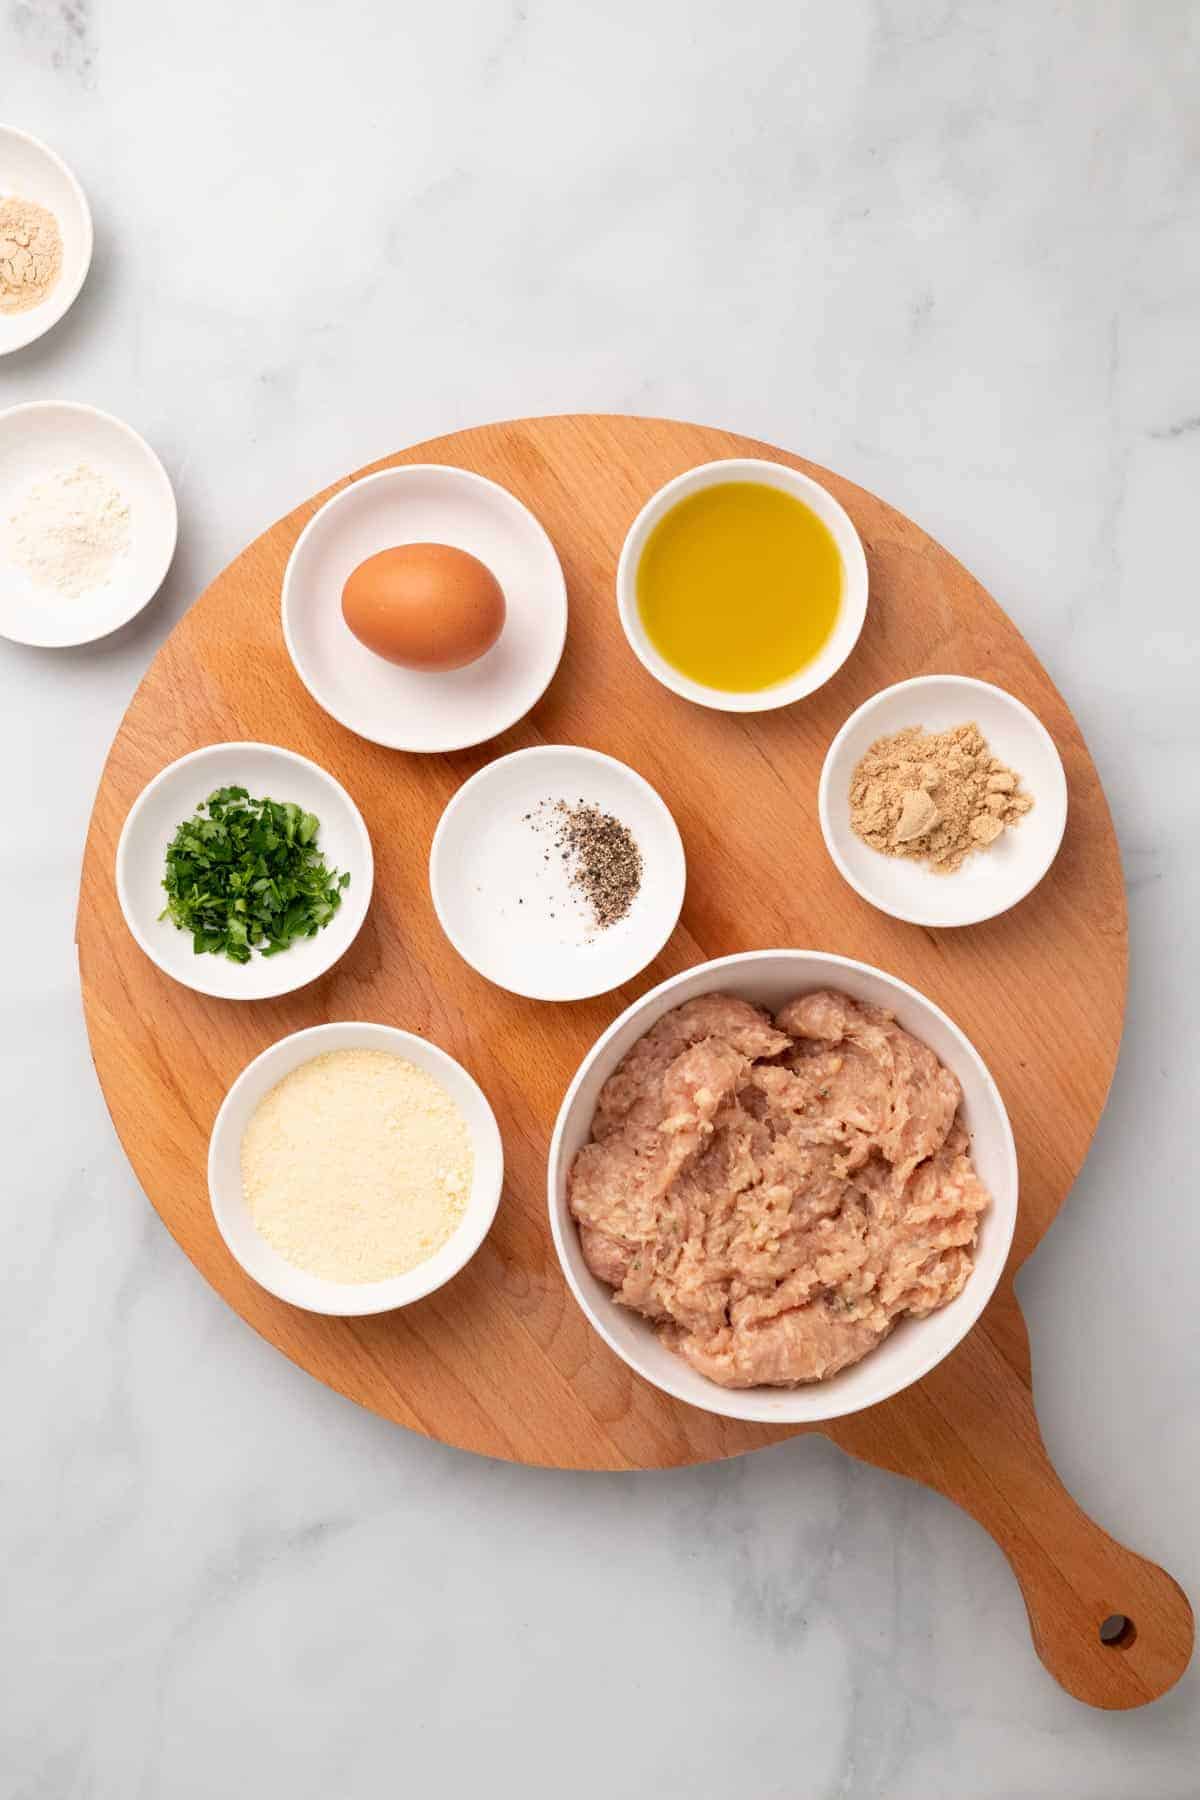 Ingredients for meatballs in separate ramekins and dishes, as seen from above